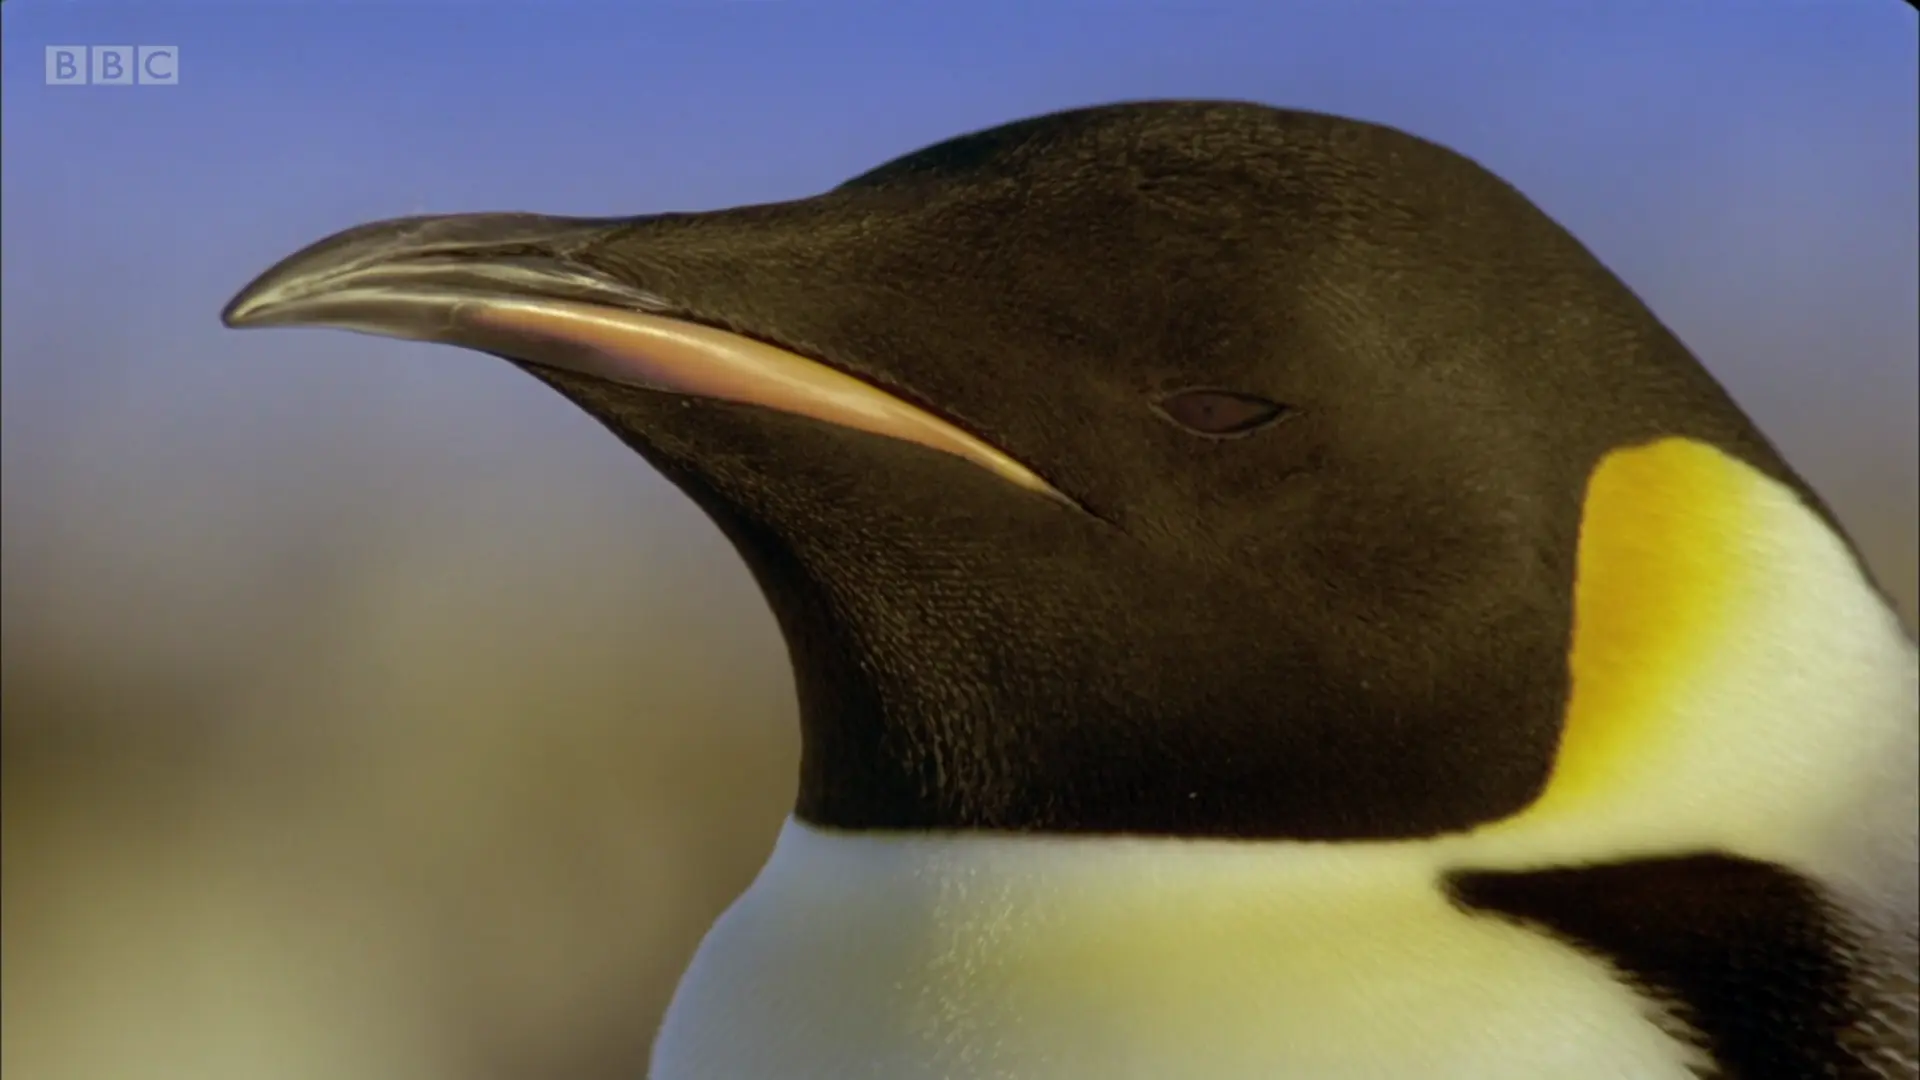 Emperor penguin (Aptenodytes forsteri) as shown in Planet Earth - From Pole to Pole